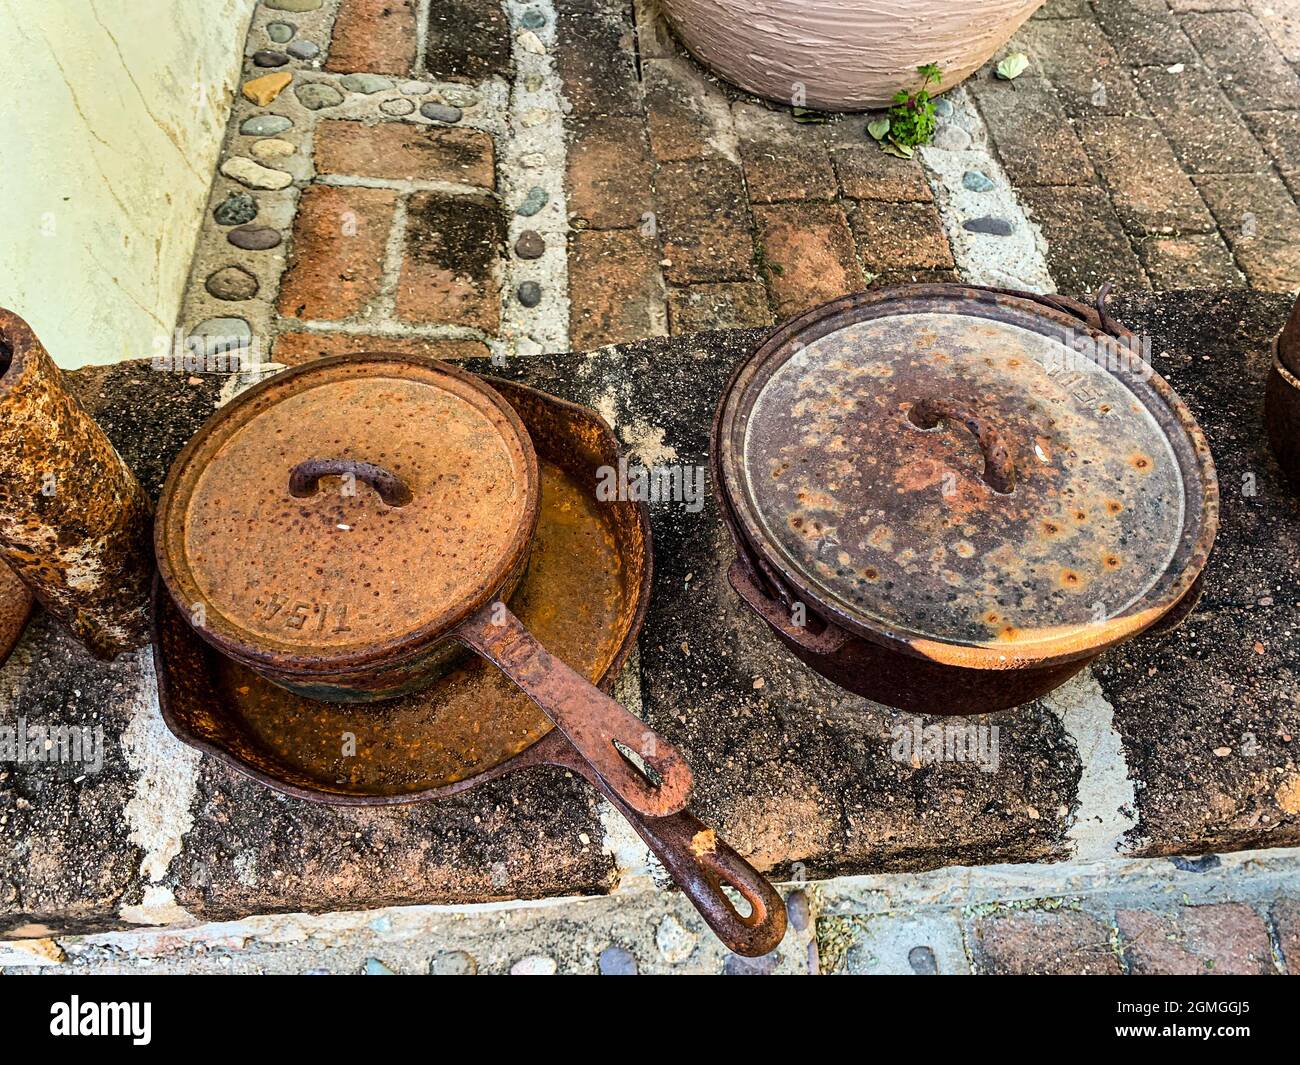 Reddish steel pans by rusted metal in the kitchen of Hacienda del Labrador  in the town of Ures, Sonora, Mexico. real state, Hacienda Labrador,  history, ranches and haciendas of Mexico, Mexican style,